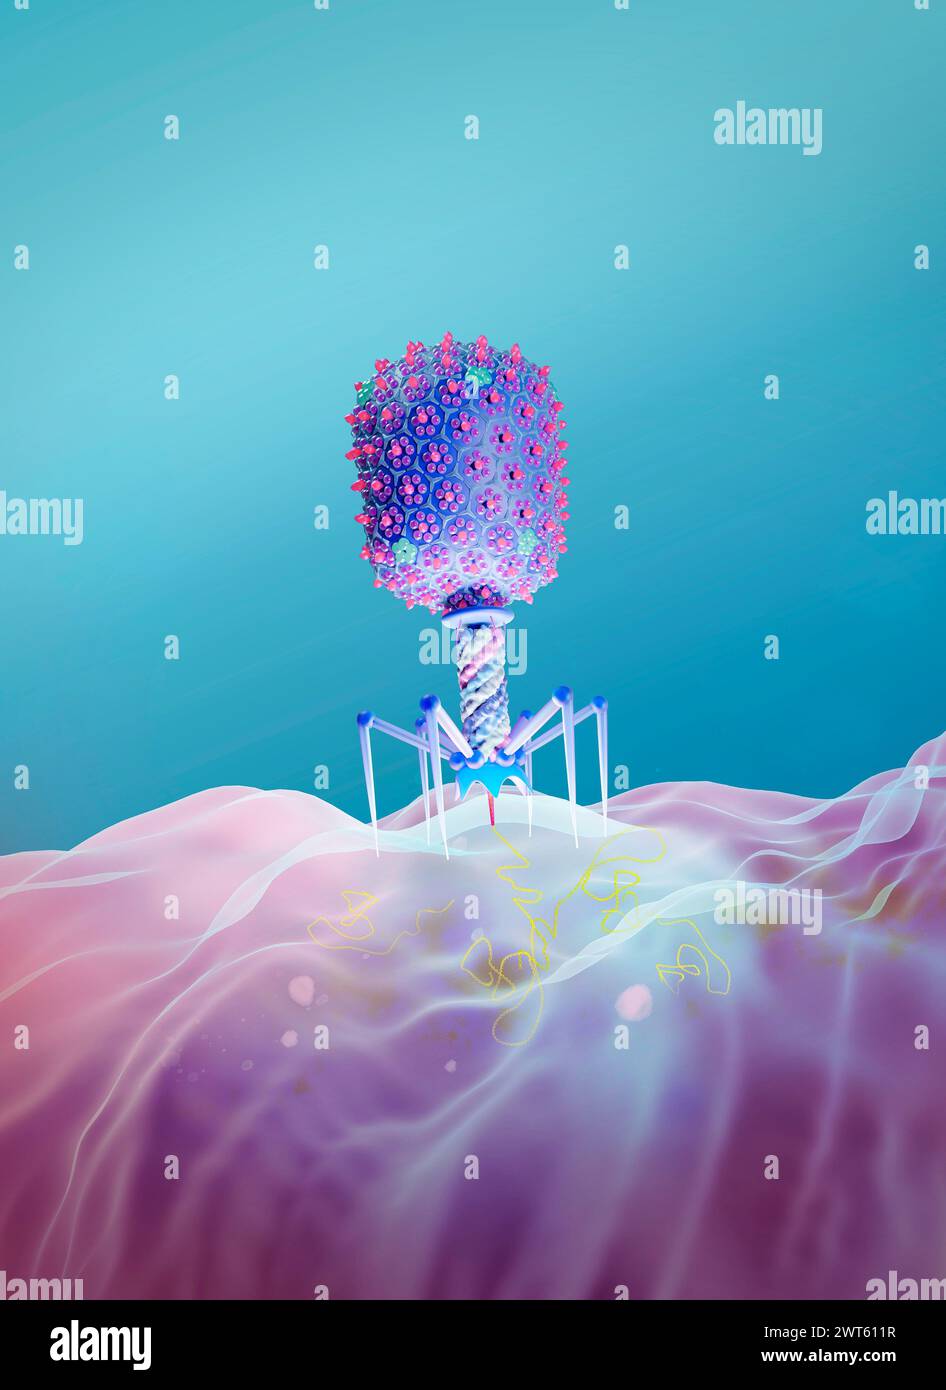 Illustration of an Escherichia virus T4 bacteriophage on an E. coli bacterium. The bacteriophage, or phage, infects and replicates within bacteria and can be used for phage therapy. Stock Photo